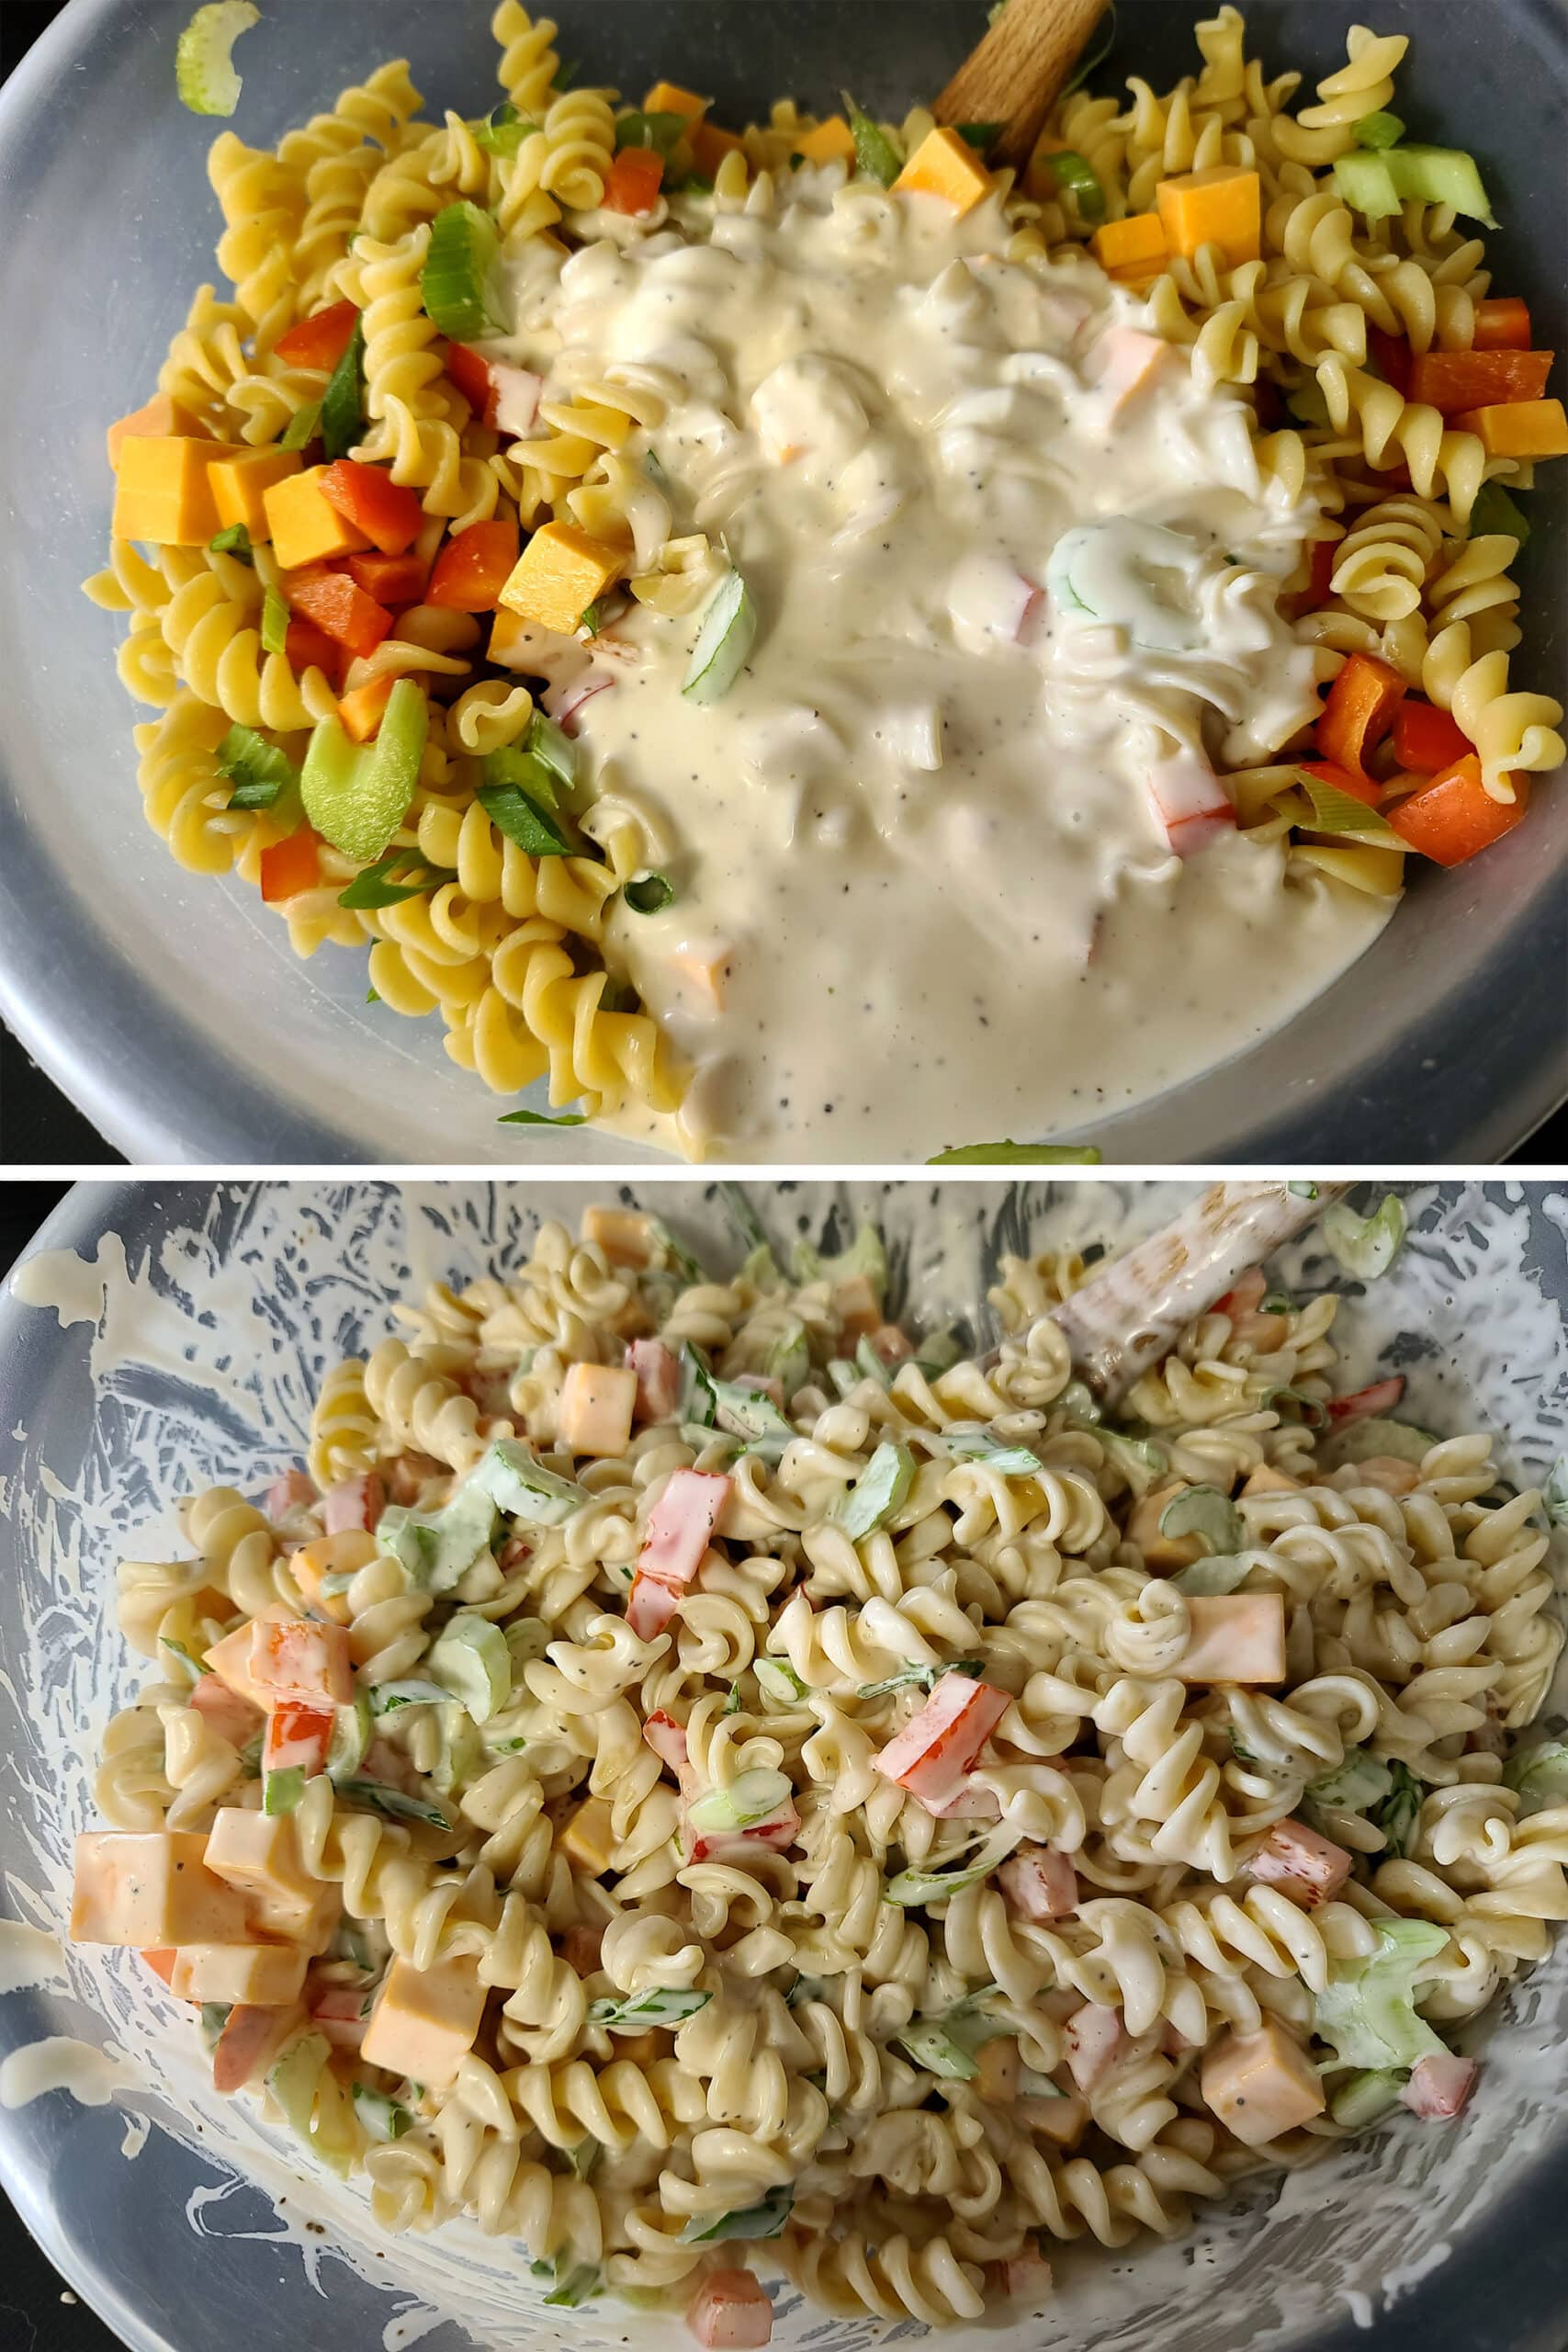 A 2 part image showing the mayo sauce being mixed into the bowl of pasta, veggies, and cheese.